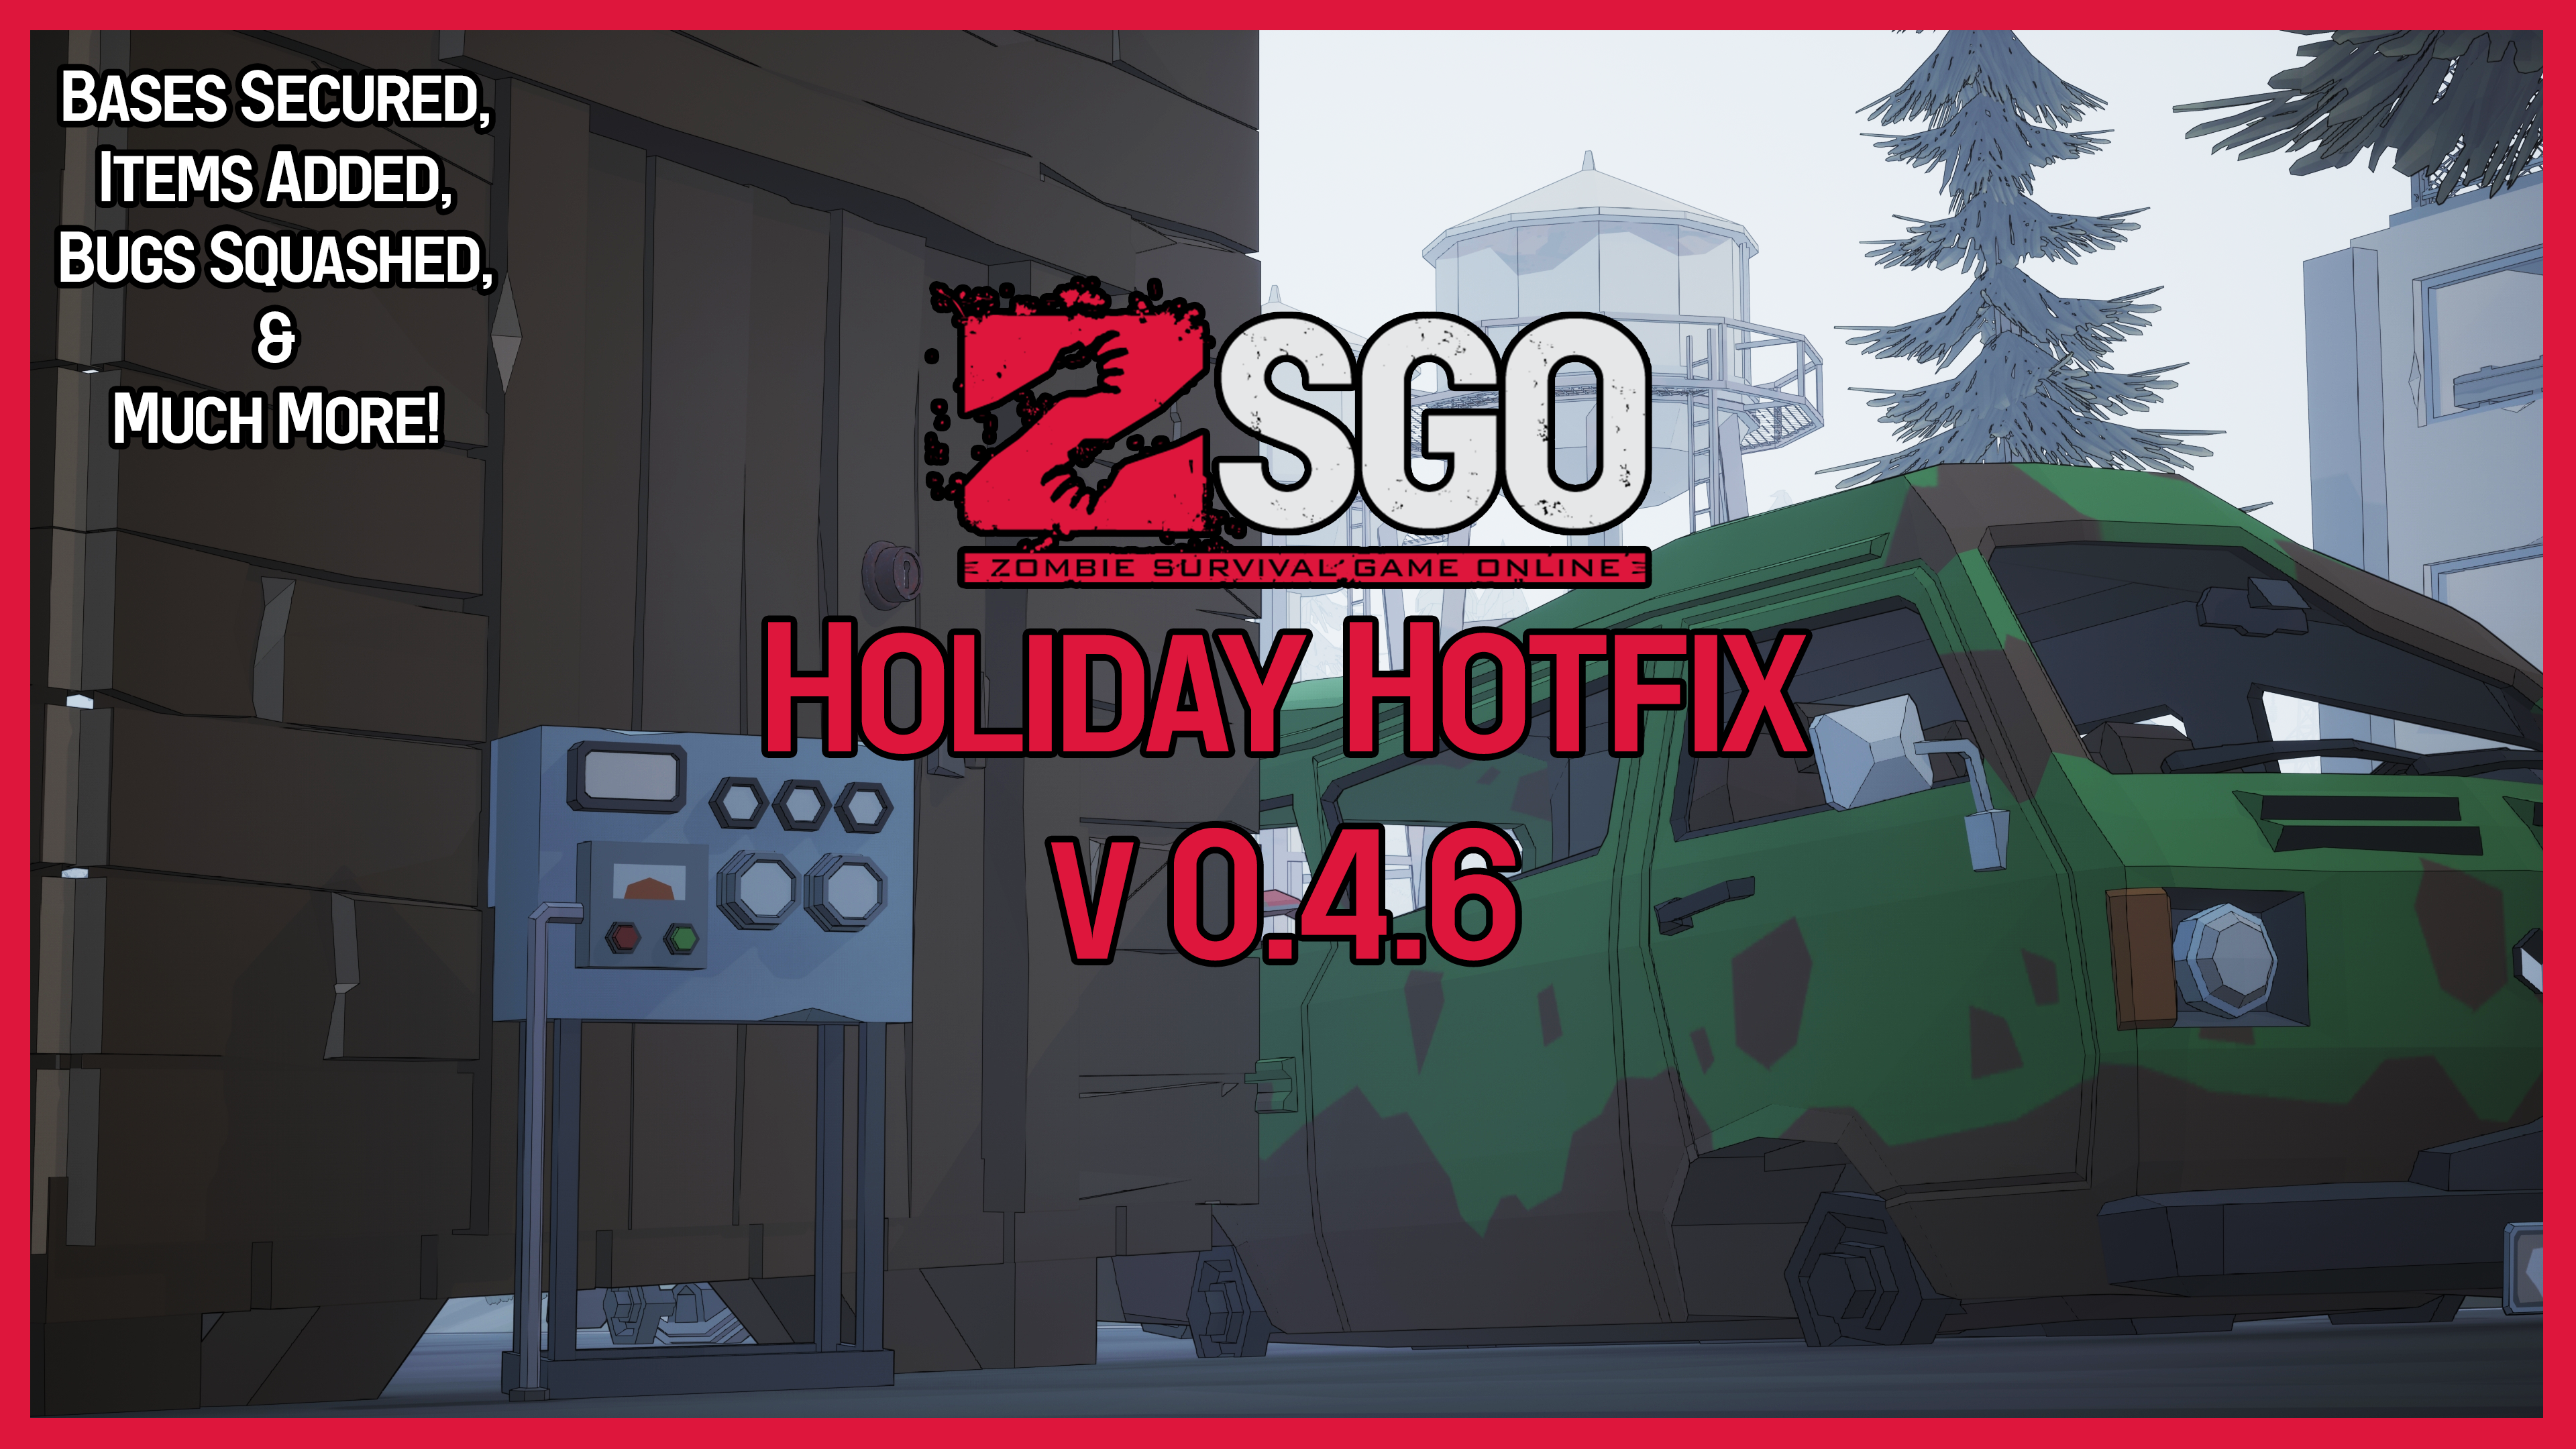 The Holiday Hotfix patch for ZSGO, v0.4.6.